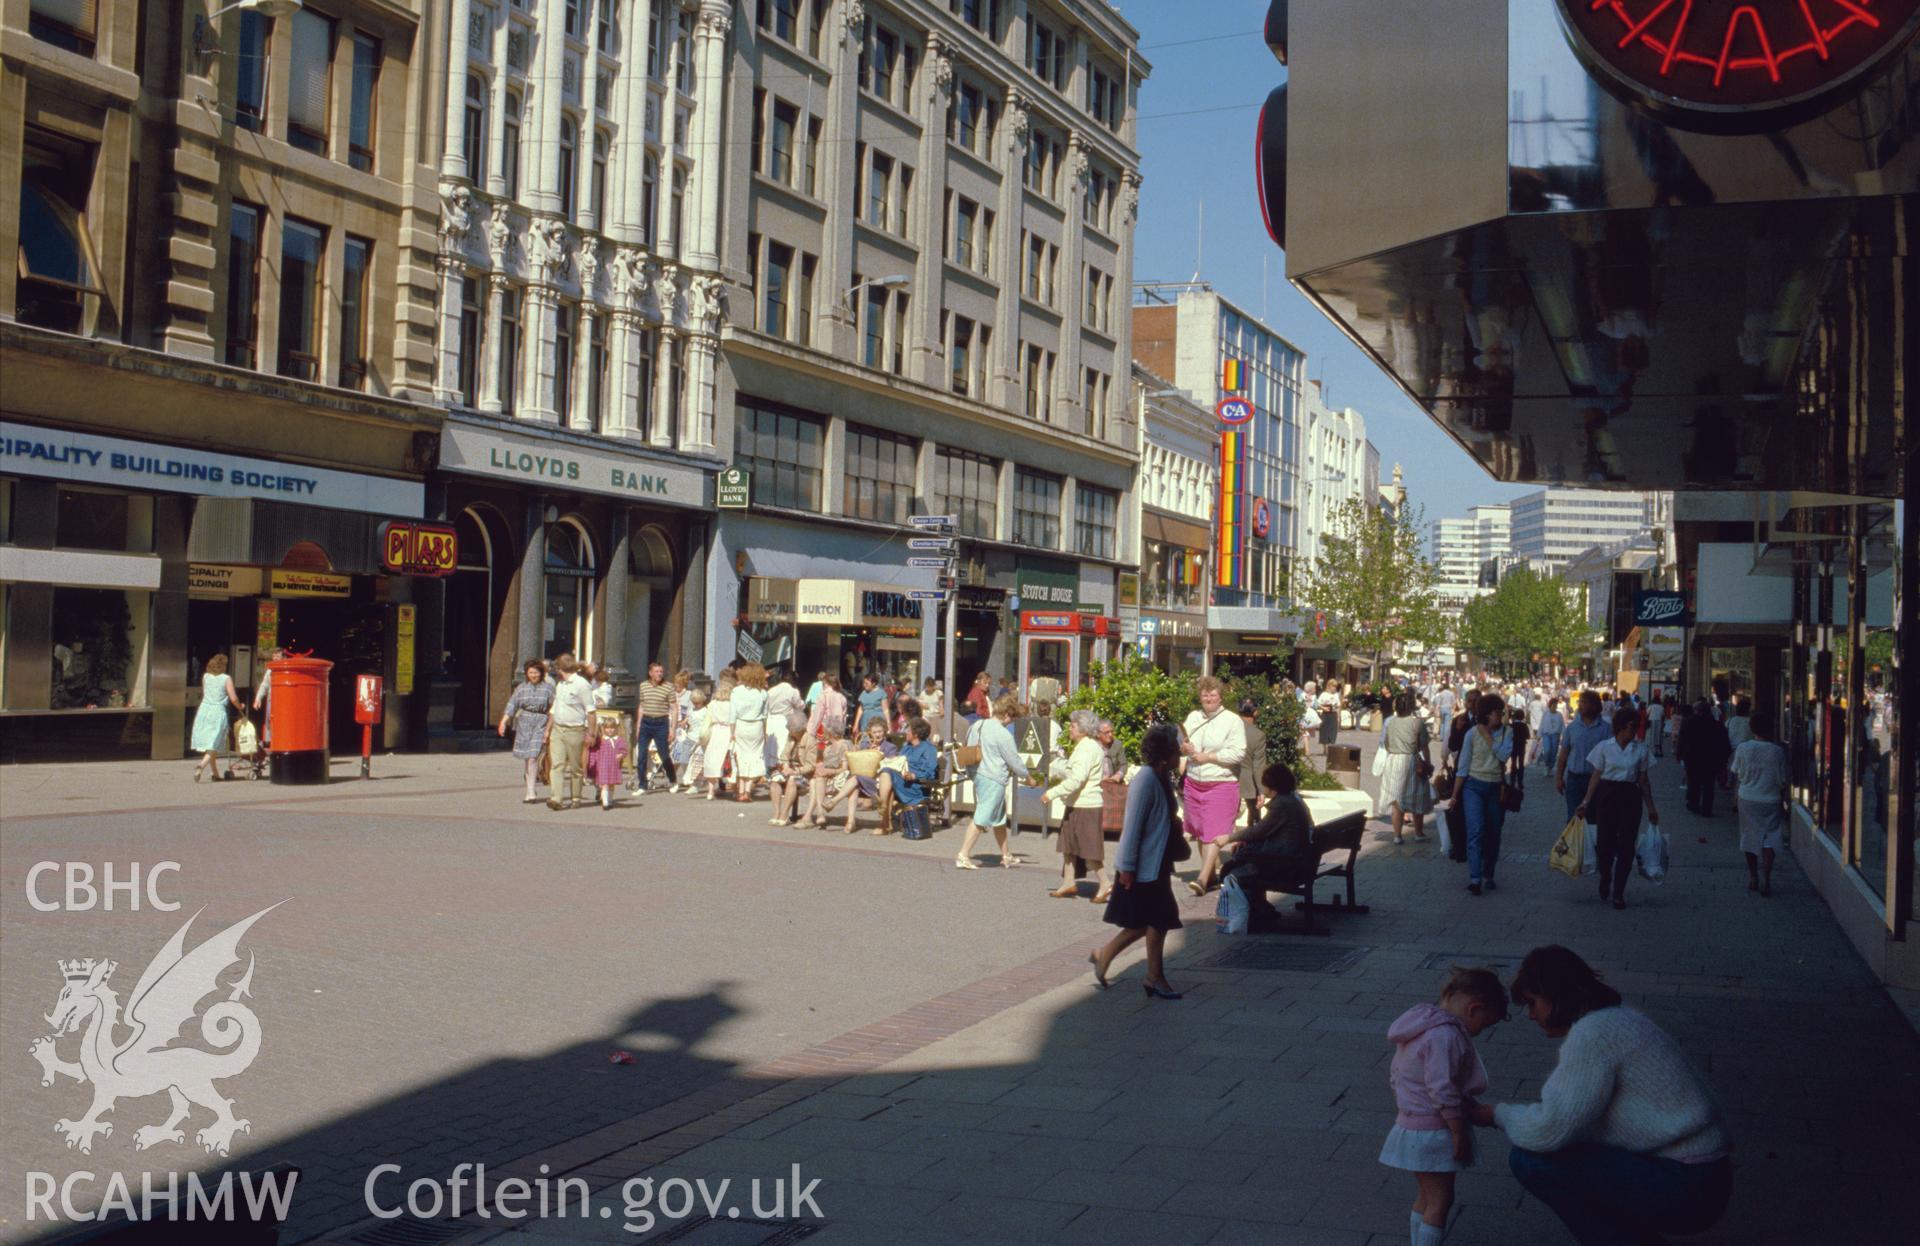 Colour transparency showing view of shopping streets, central Cardiff; collated by the former Central Office of Information.